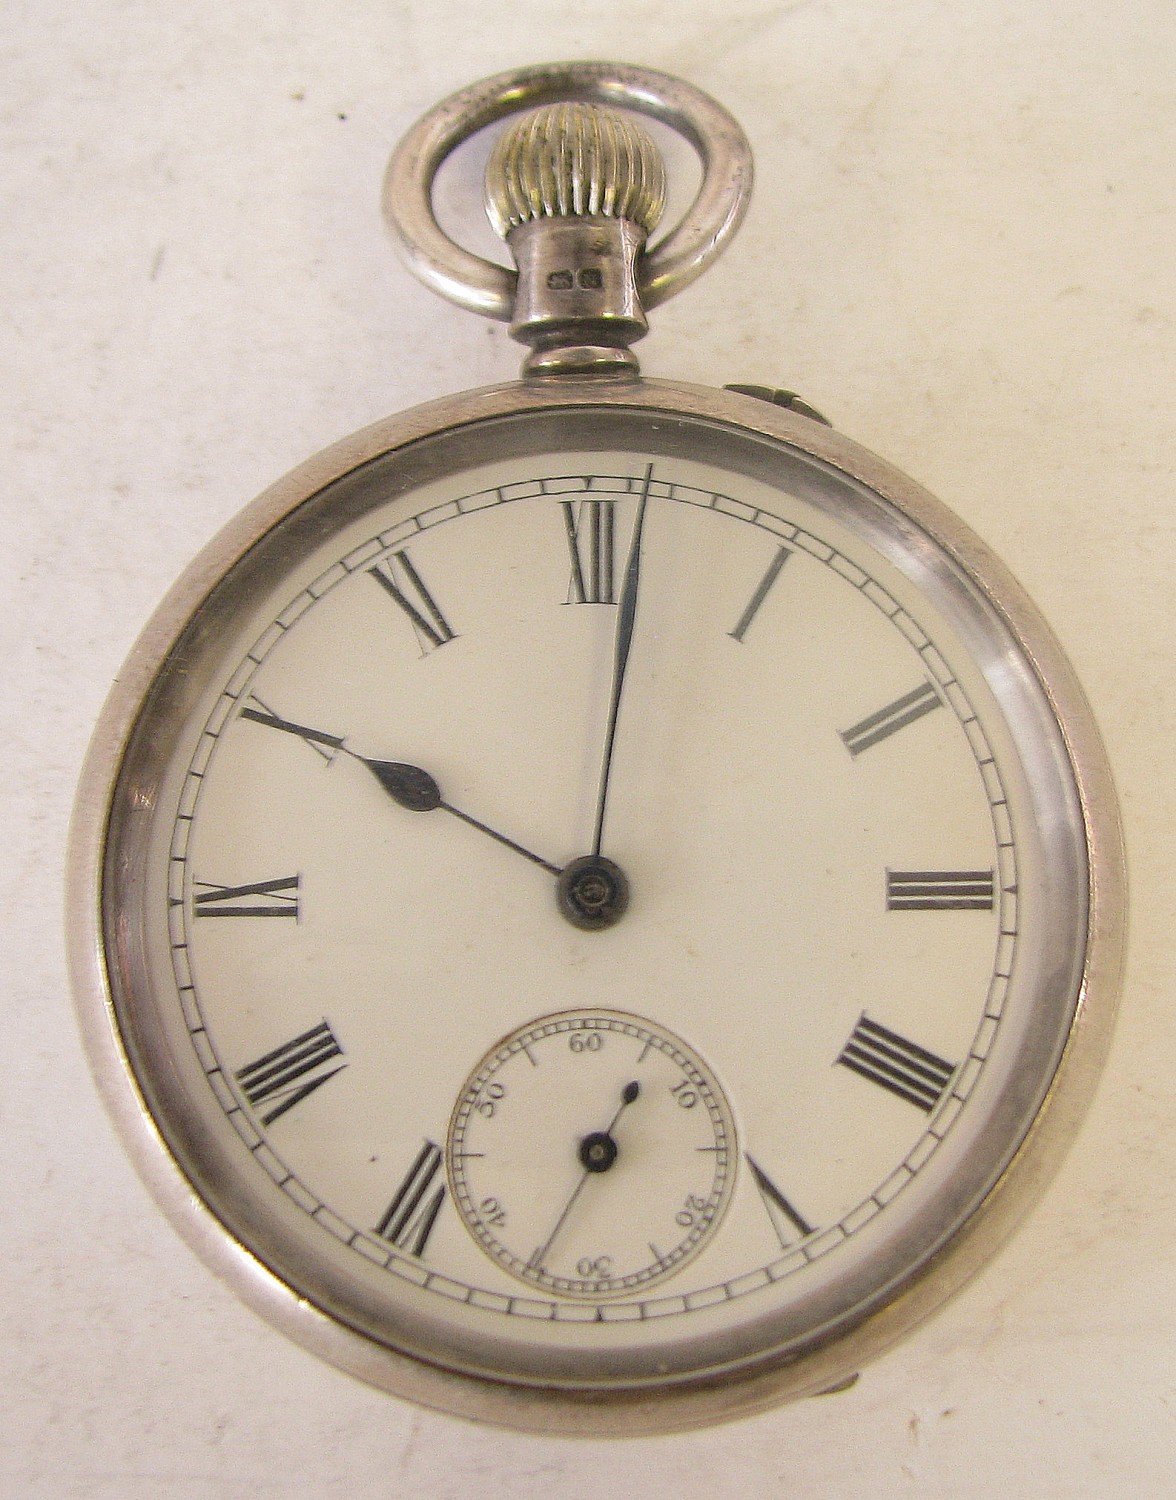 J. Fernley, Warrington, Silver Open Faced Pocket Watch having white enamelled dial with seconds dial